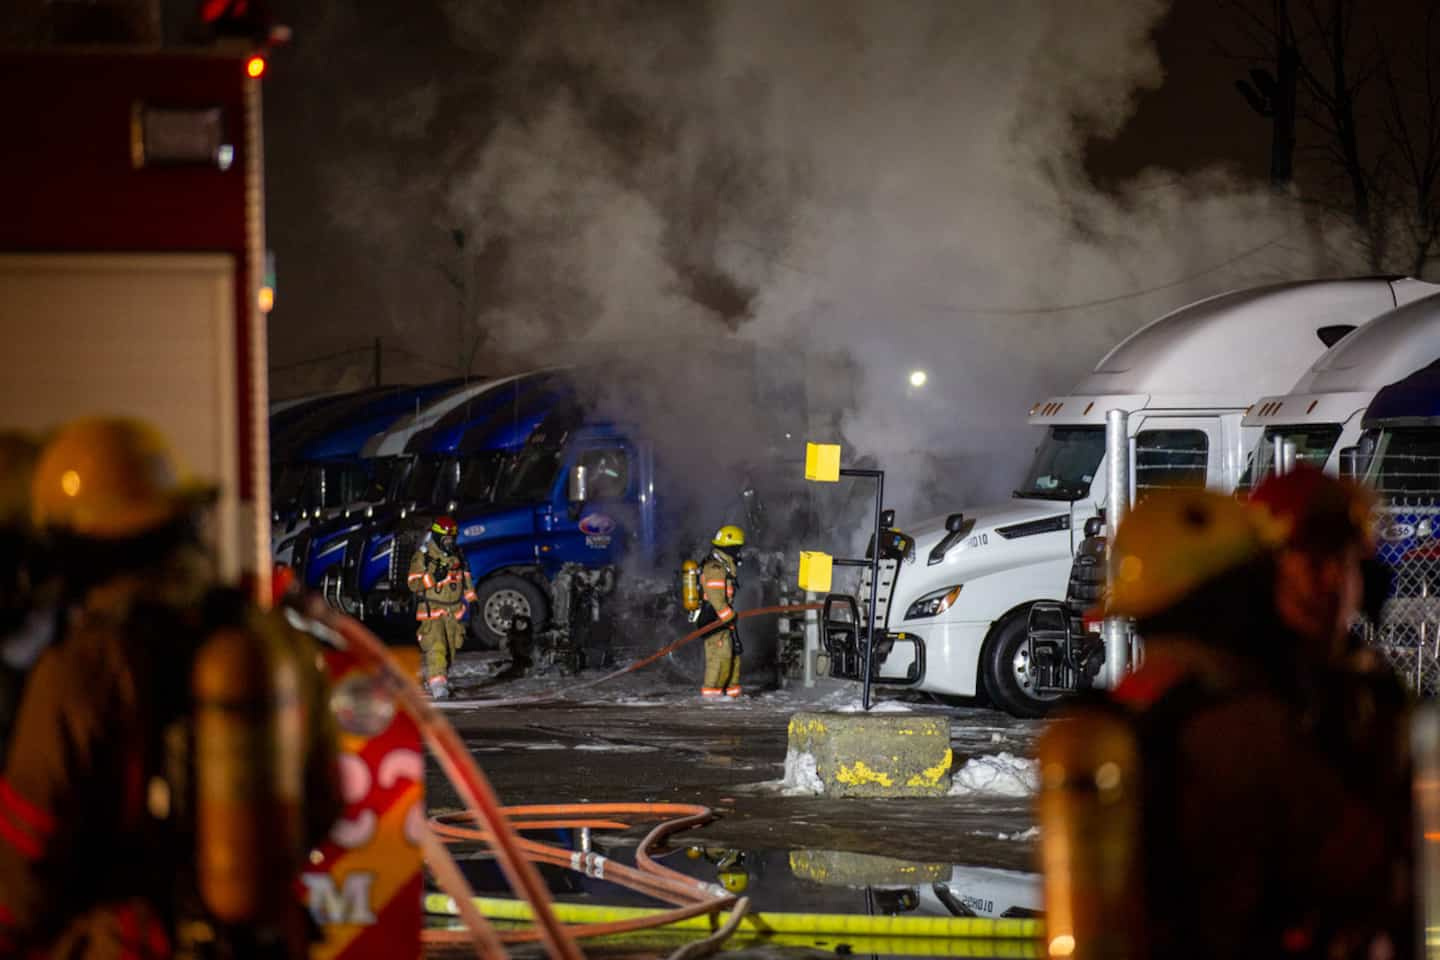 Six trucks were engulfed in flames in Dorval